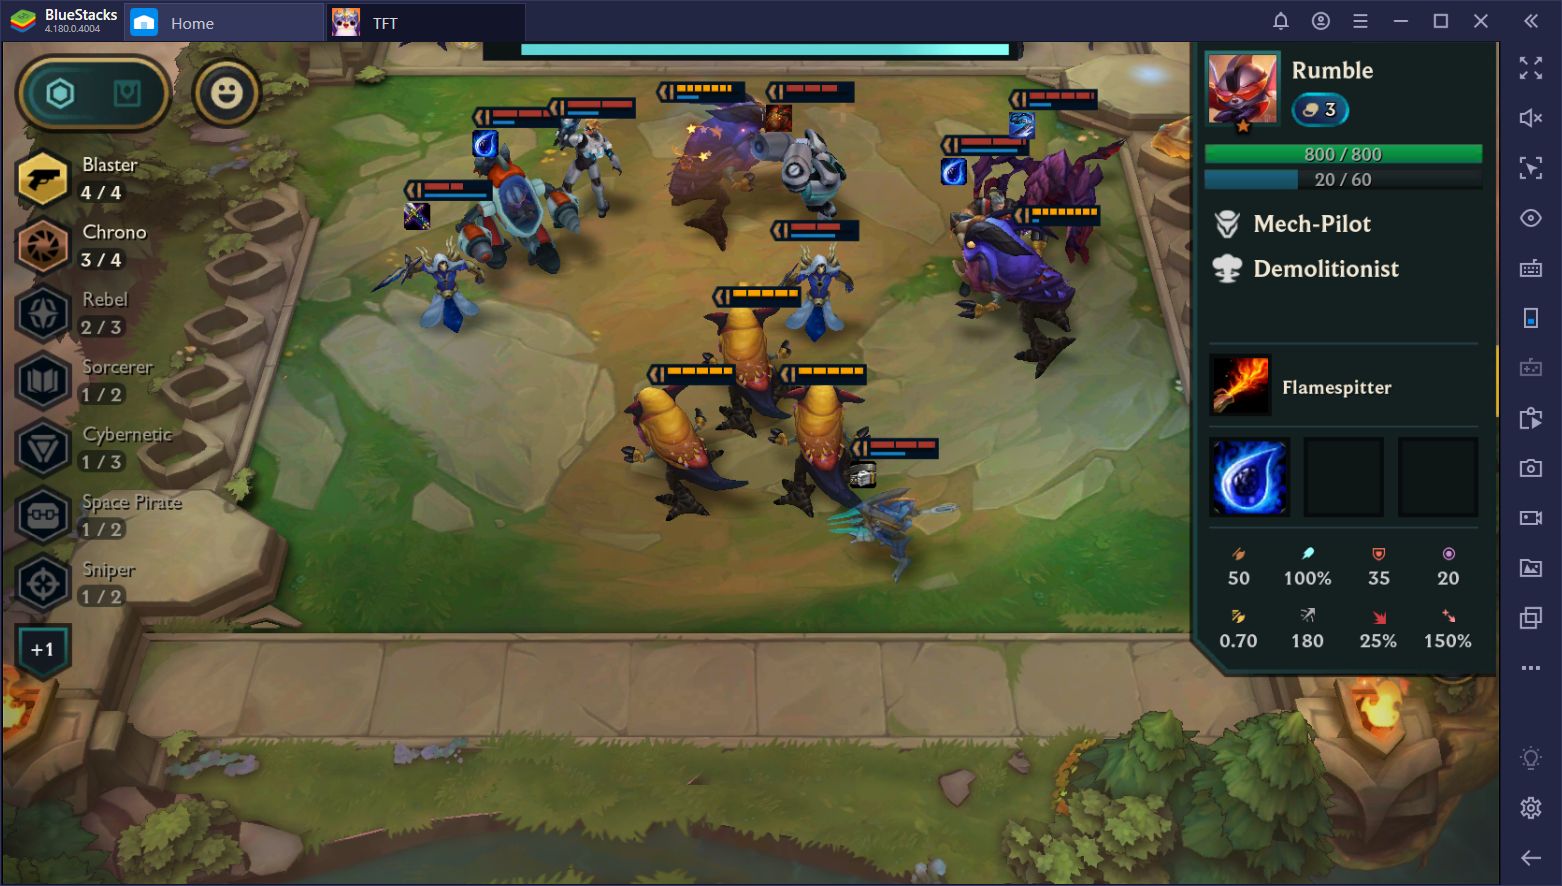 Teamfight Tactics on BlueStacks - The Best Tips and Tricks For Winning Every Match